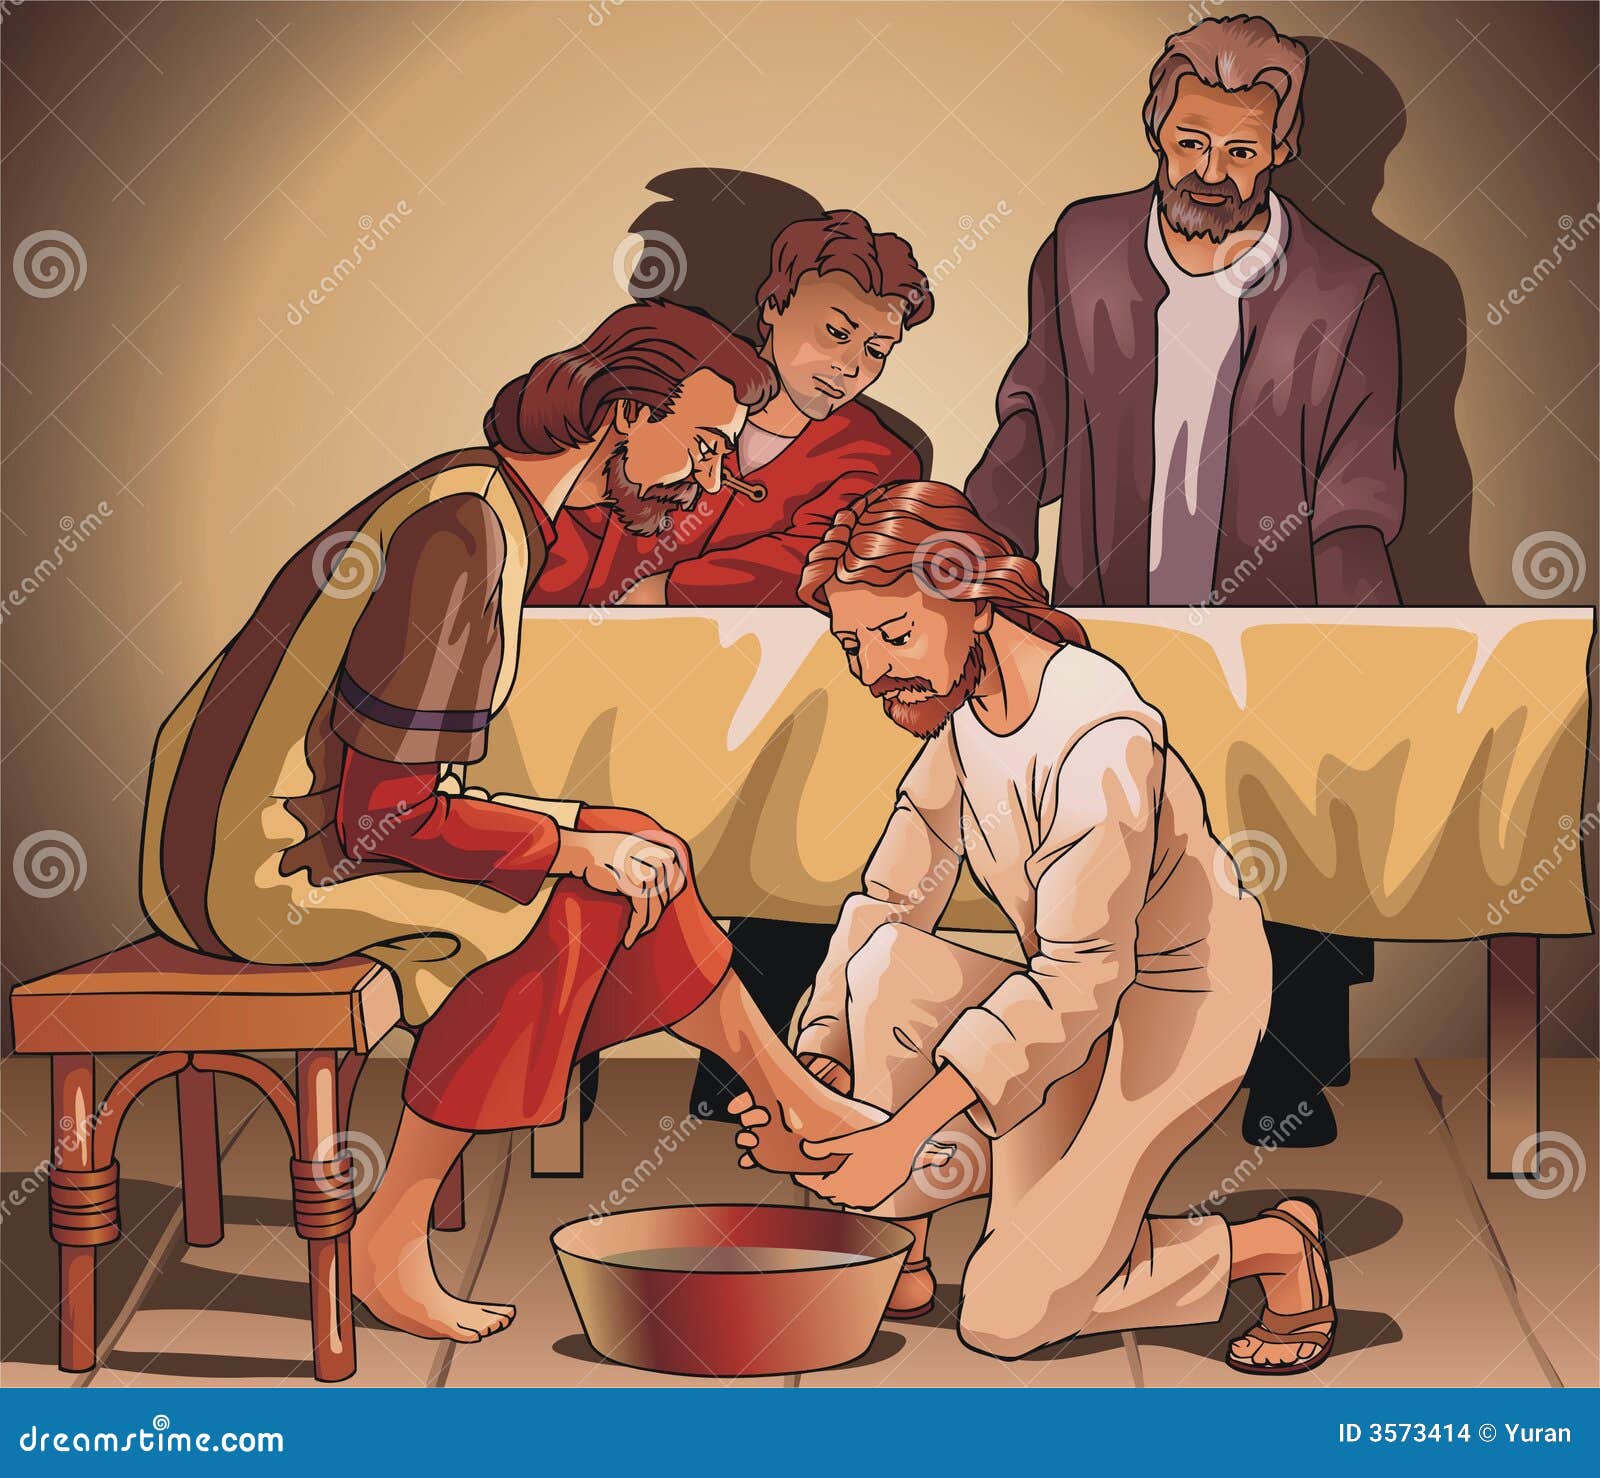 jesus washing the disciples feet clipart - photo #1